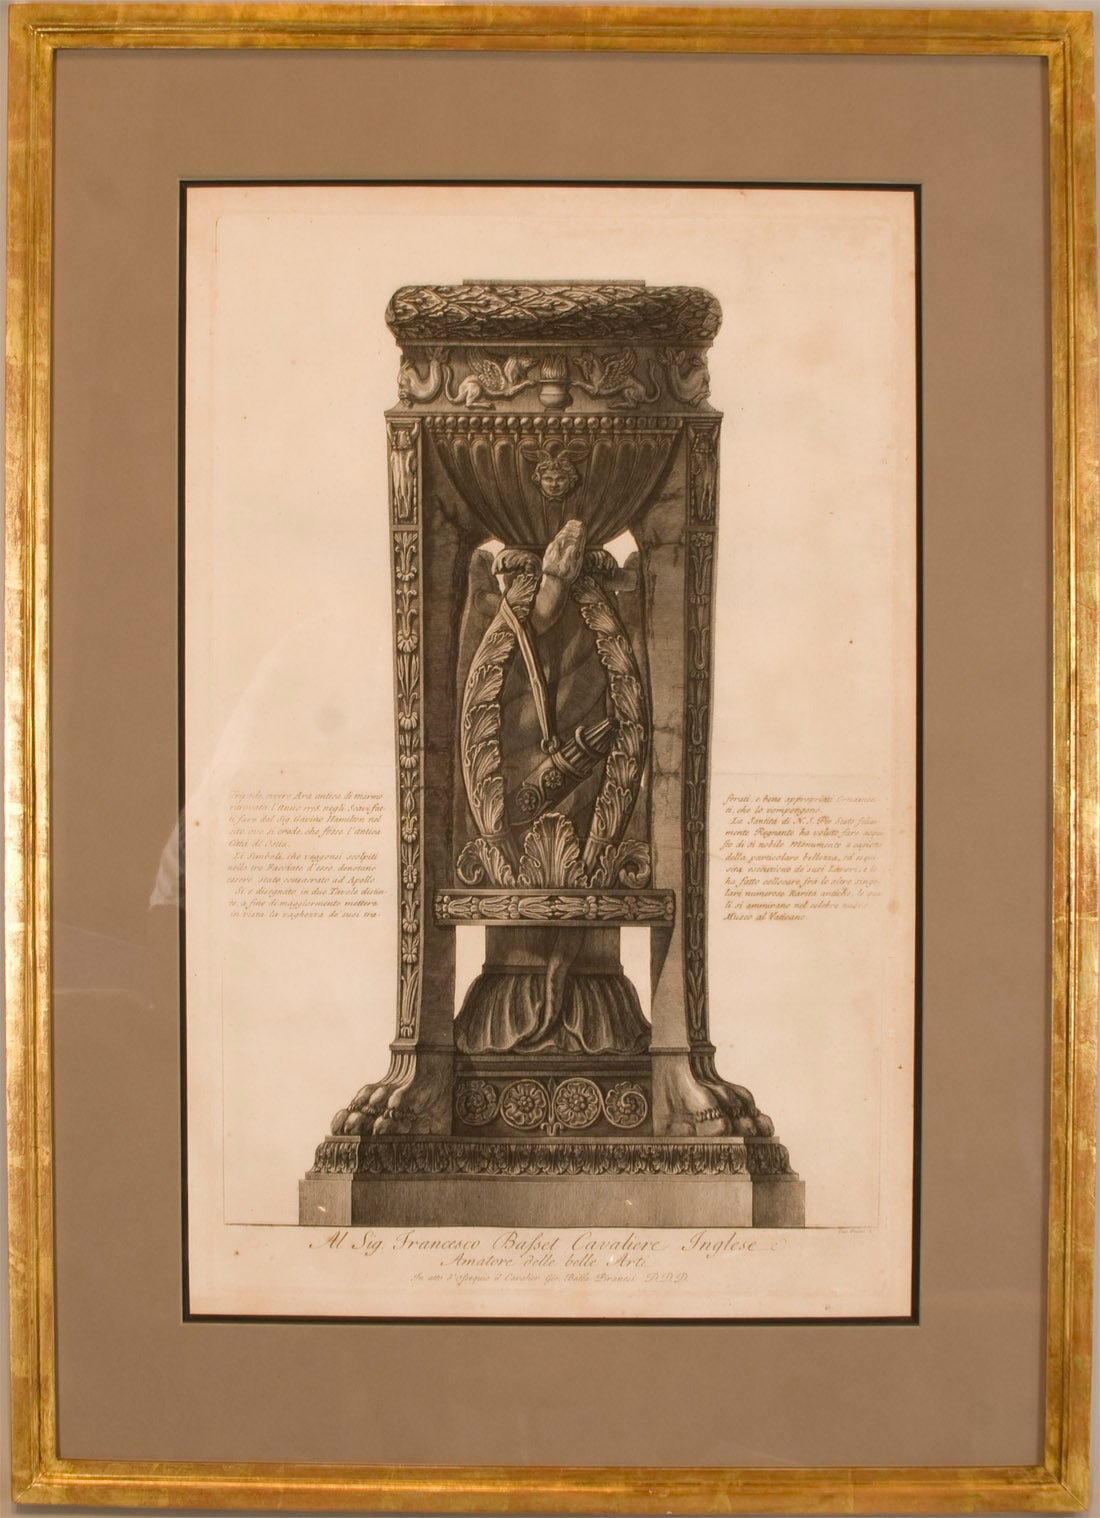 G. B. Piranesi in his fifties was interested in archaeology and studied in Southern Italy where he produced drawings of Greek architecture.
Medium: Etching on laid paper.
Year: circa 1770.
Signature: Signed in lower right Cav. Piranesi F.